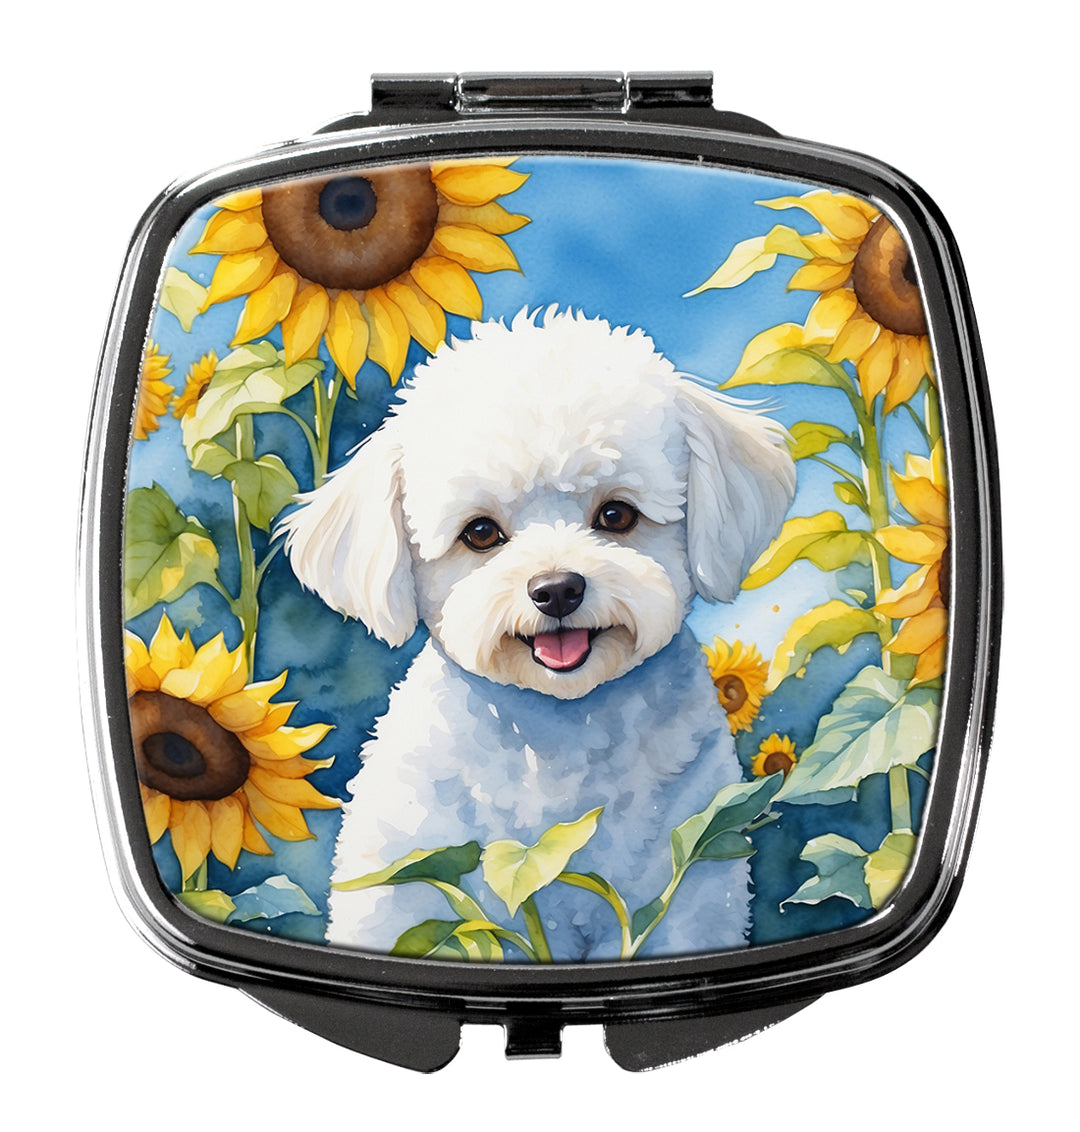 Bichon Frise in Sunflowers Compact Mirror Image 1